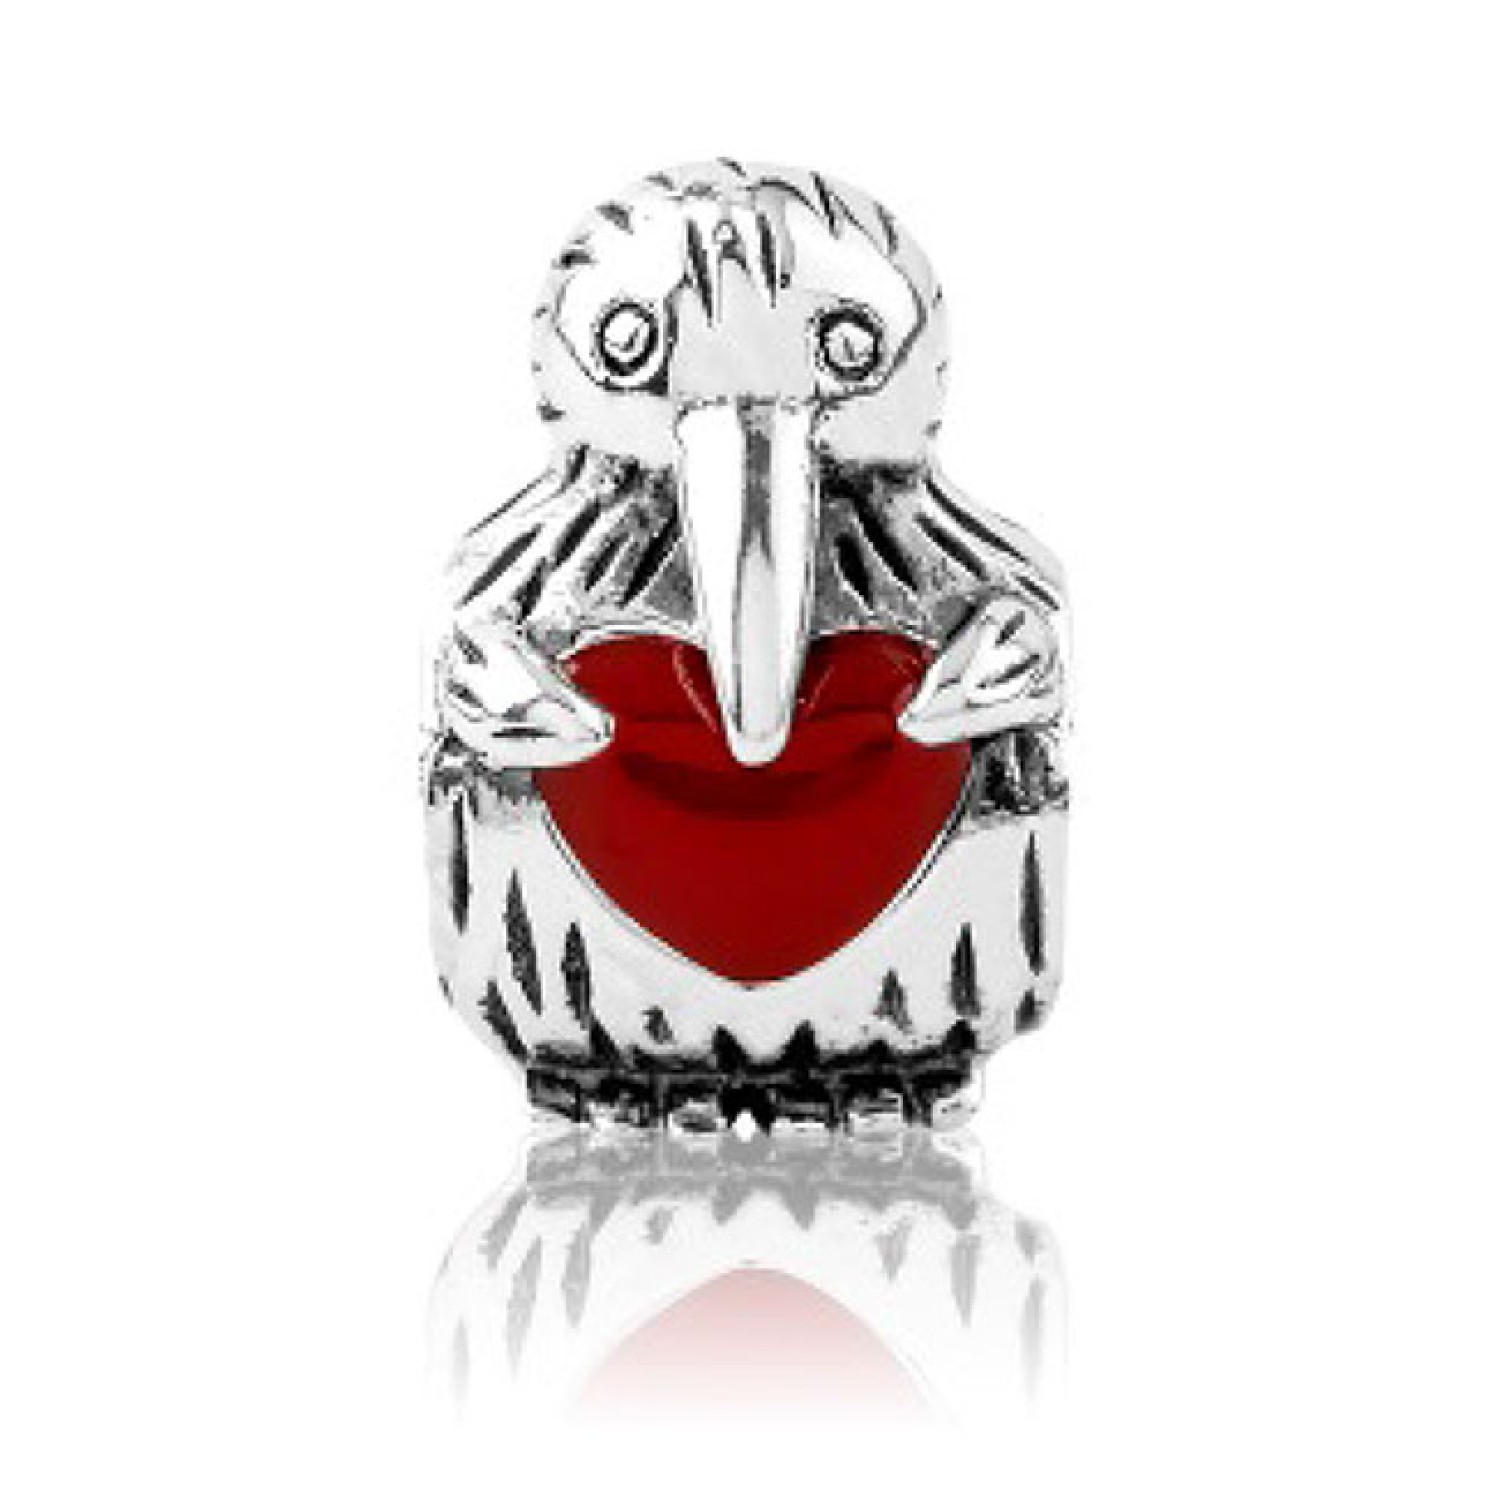 LKE014 Evolve Charm Kiwi Love (Small). Evolves little Kiwi hugging an adorable red heart represents the everlasting bond between two people, celebrating the deep love and affection one has for another,  whether it is the unbreakable bond between mo @chris